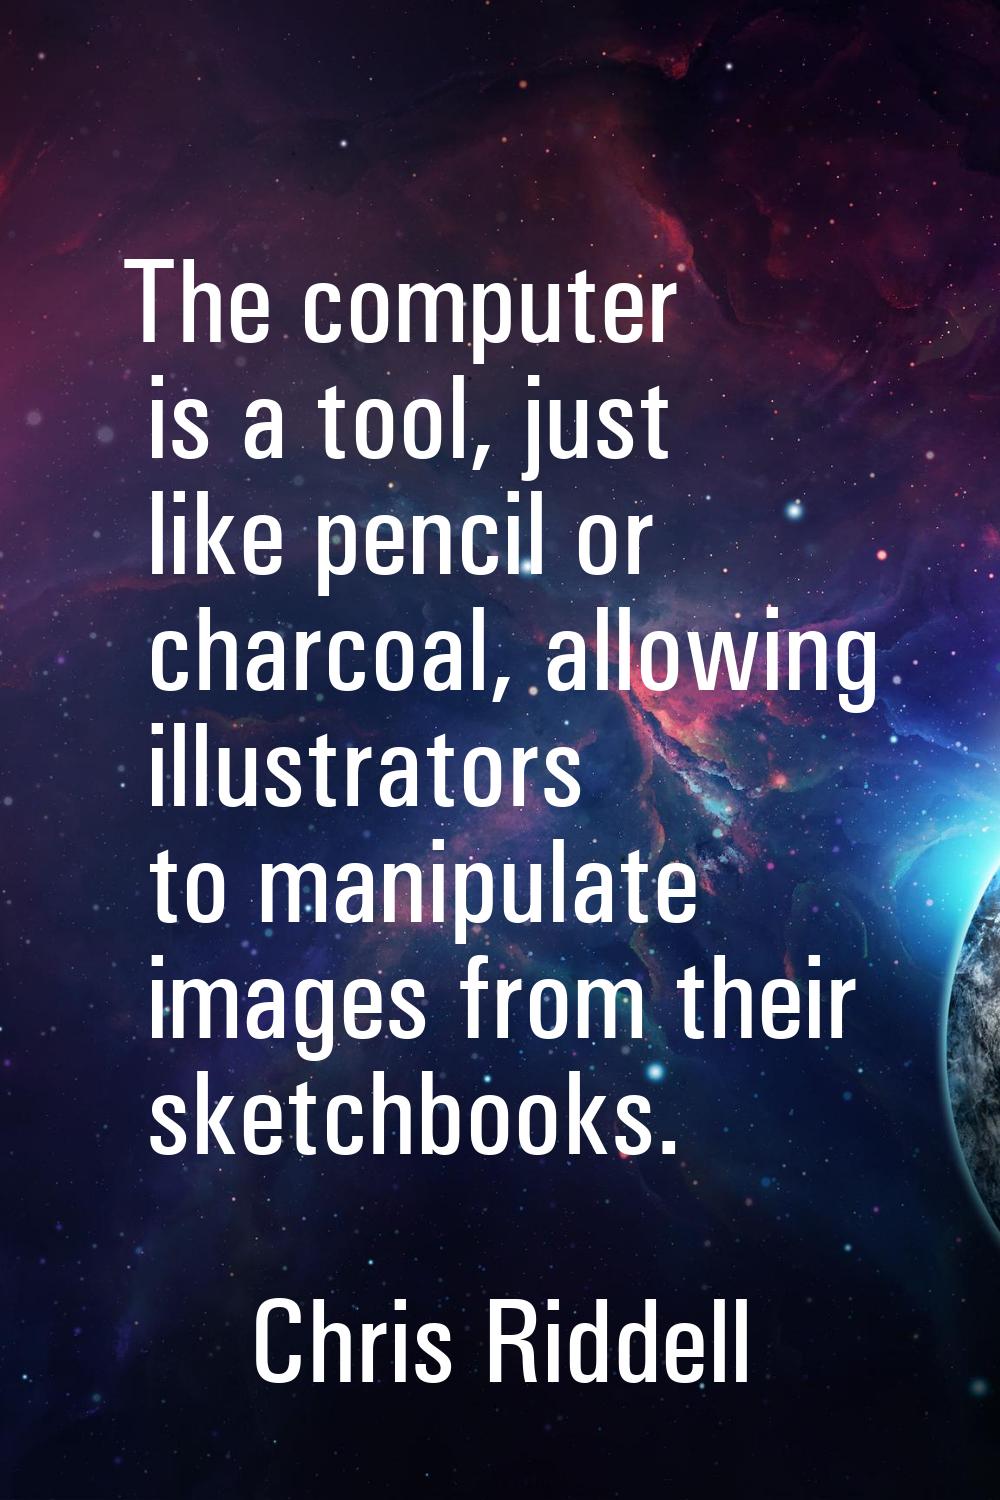 The computer is a tool, just like pencil or charcoal, allowing illustrators to manipulate images fr